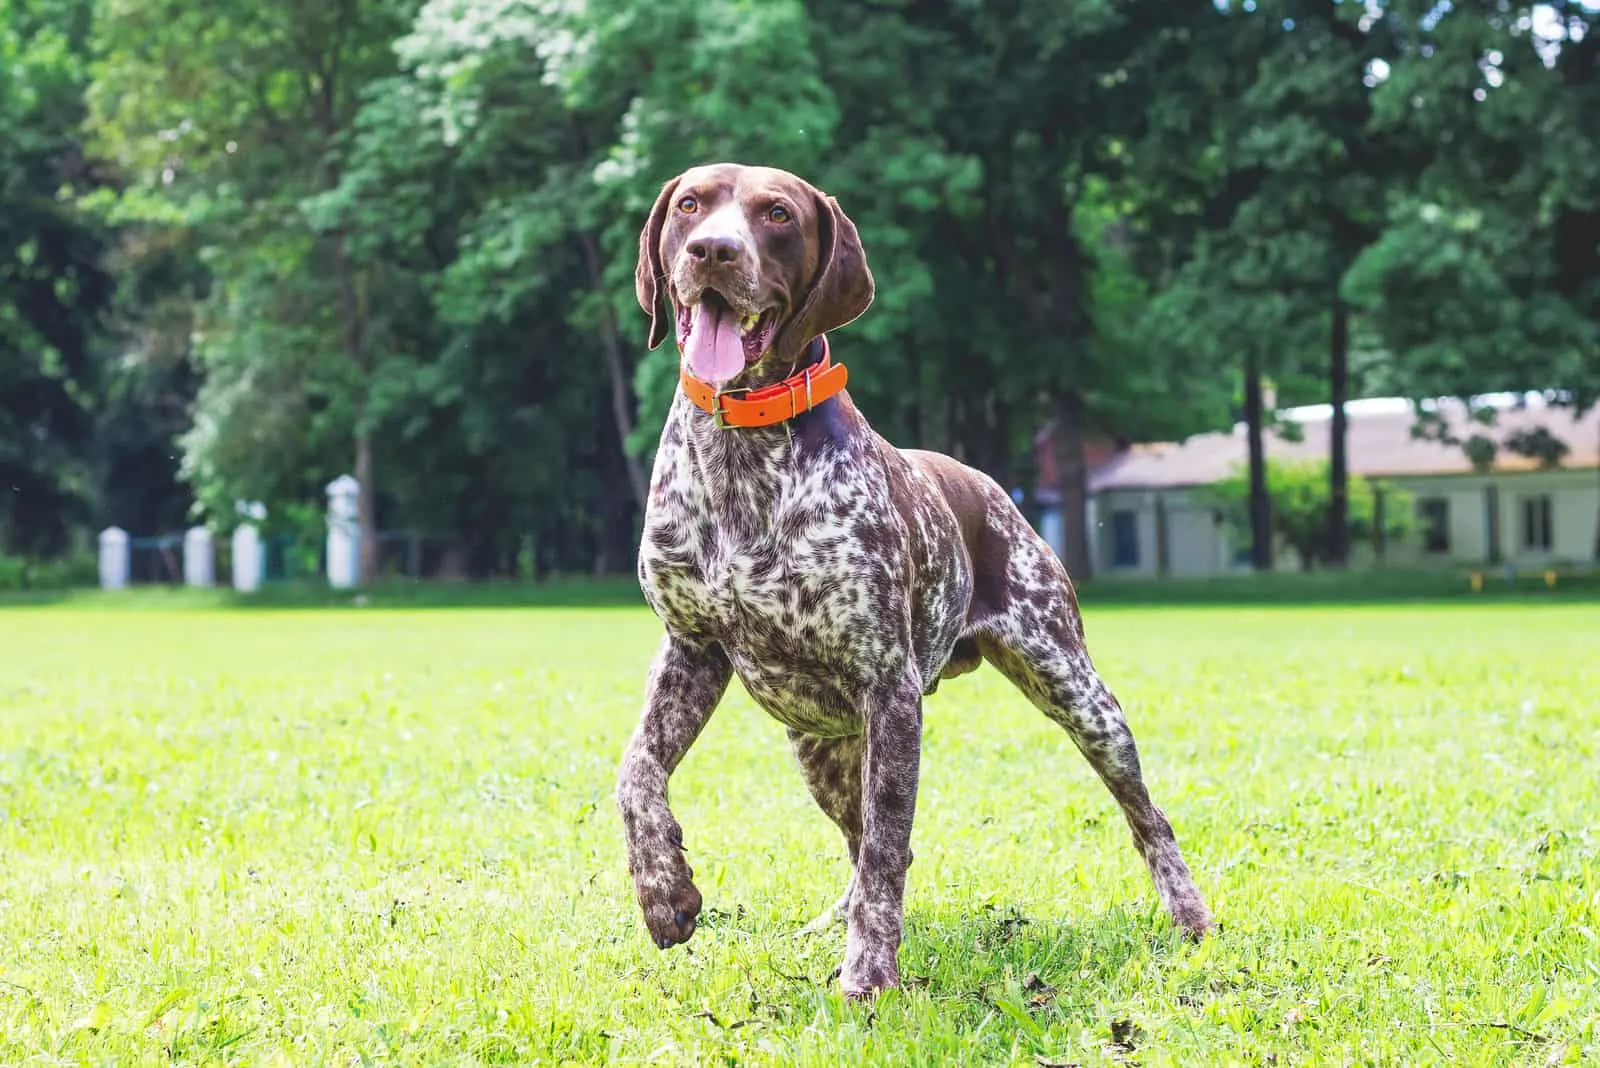 German Shorthaired Pointer posing on grass outside